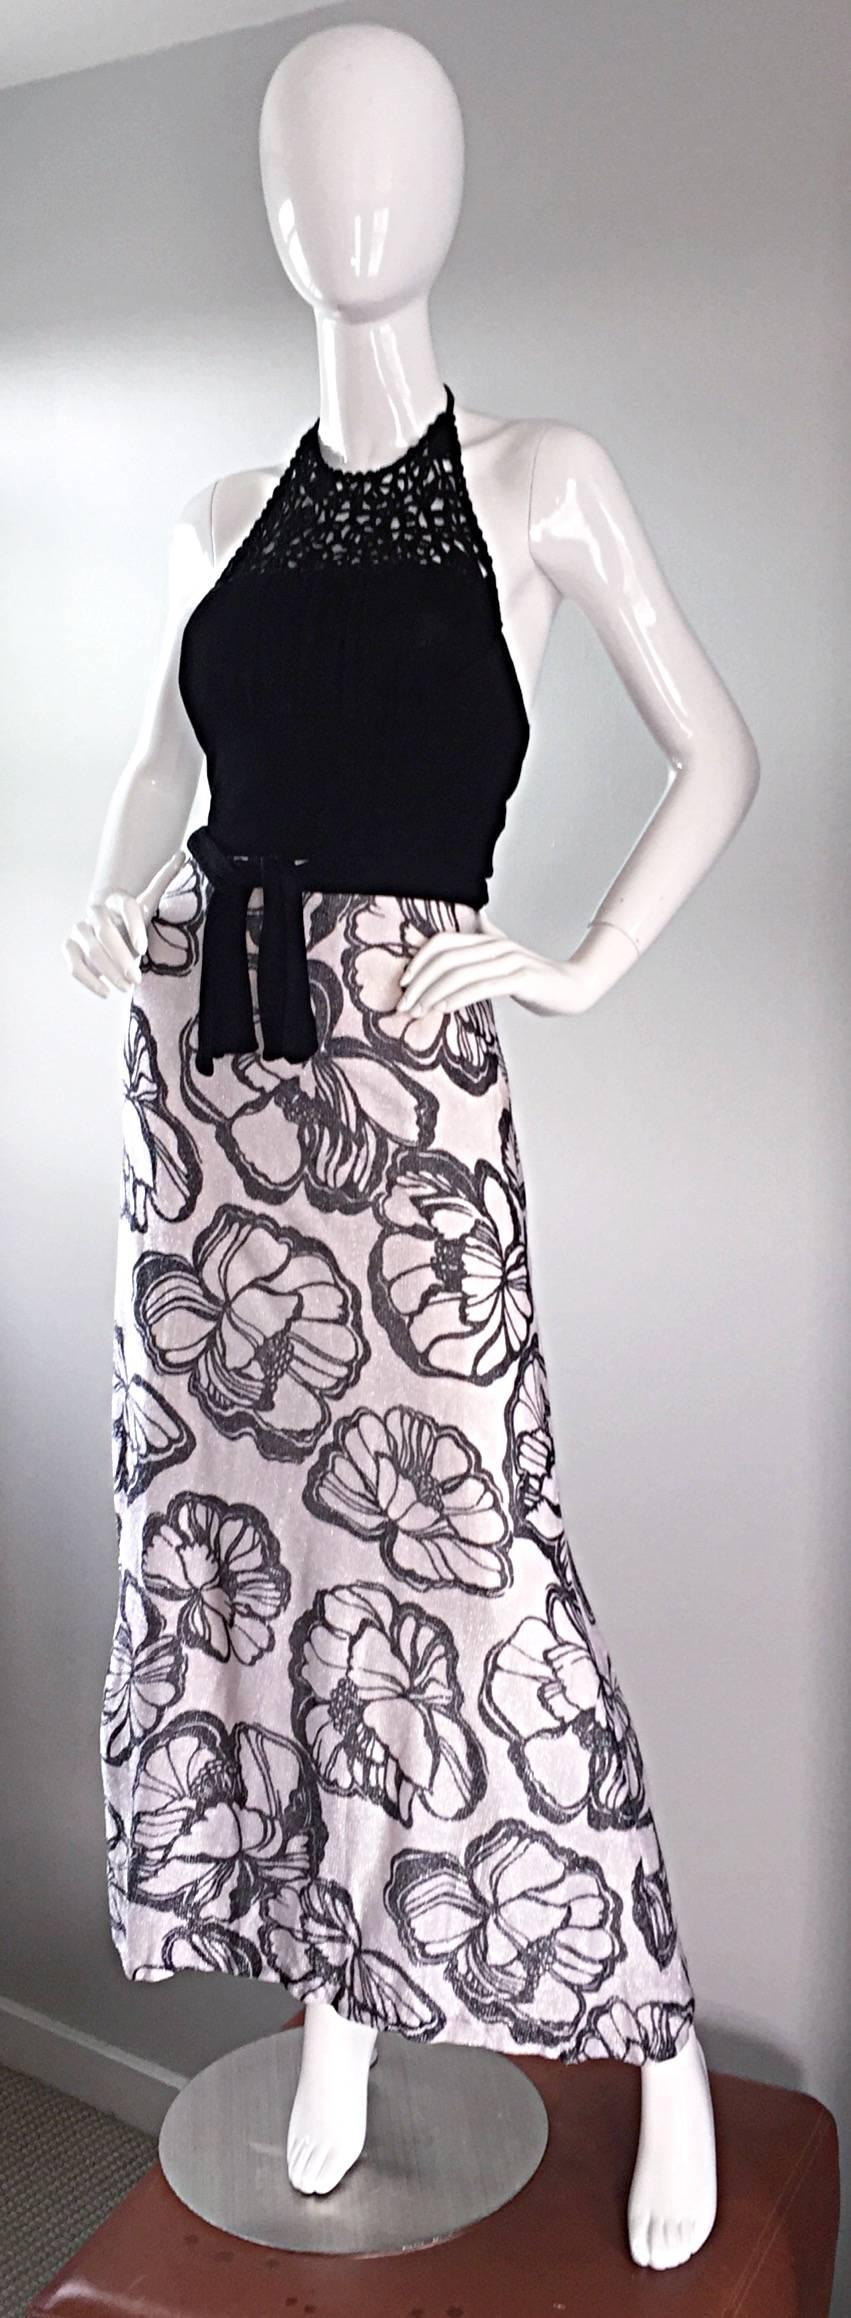 Chic 70s vintage maxi dress! Silver and black metallic maxi skirt, with printed hibiscus flowers throughout. Blak crochet bodice, with attached black sash belt. Ties at top back neck. Fabulous full skirt, that looks smashing on! Hidden zipper up the